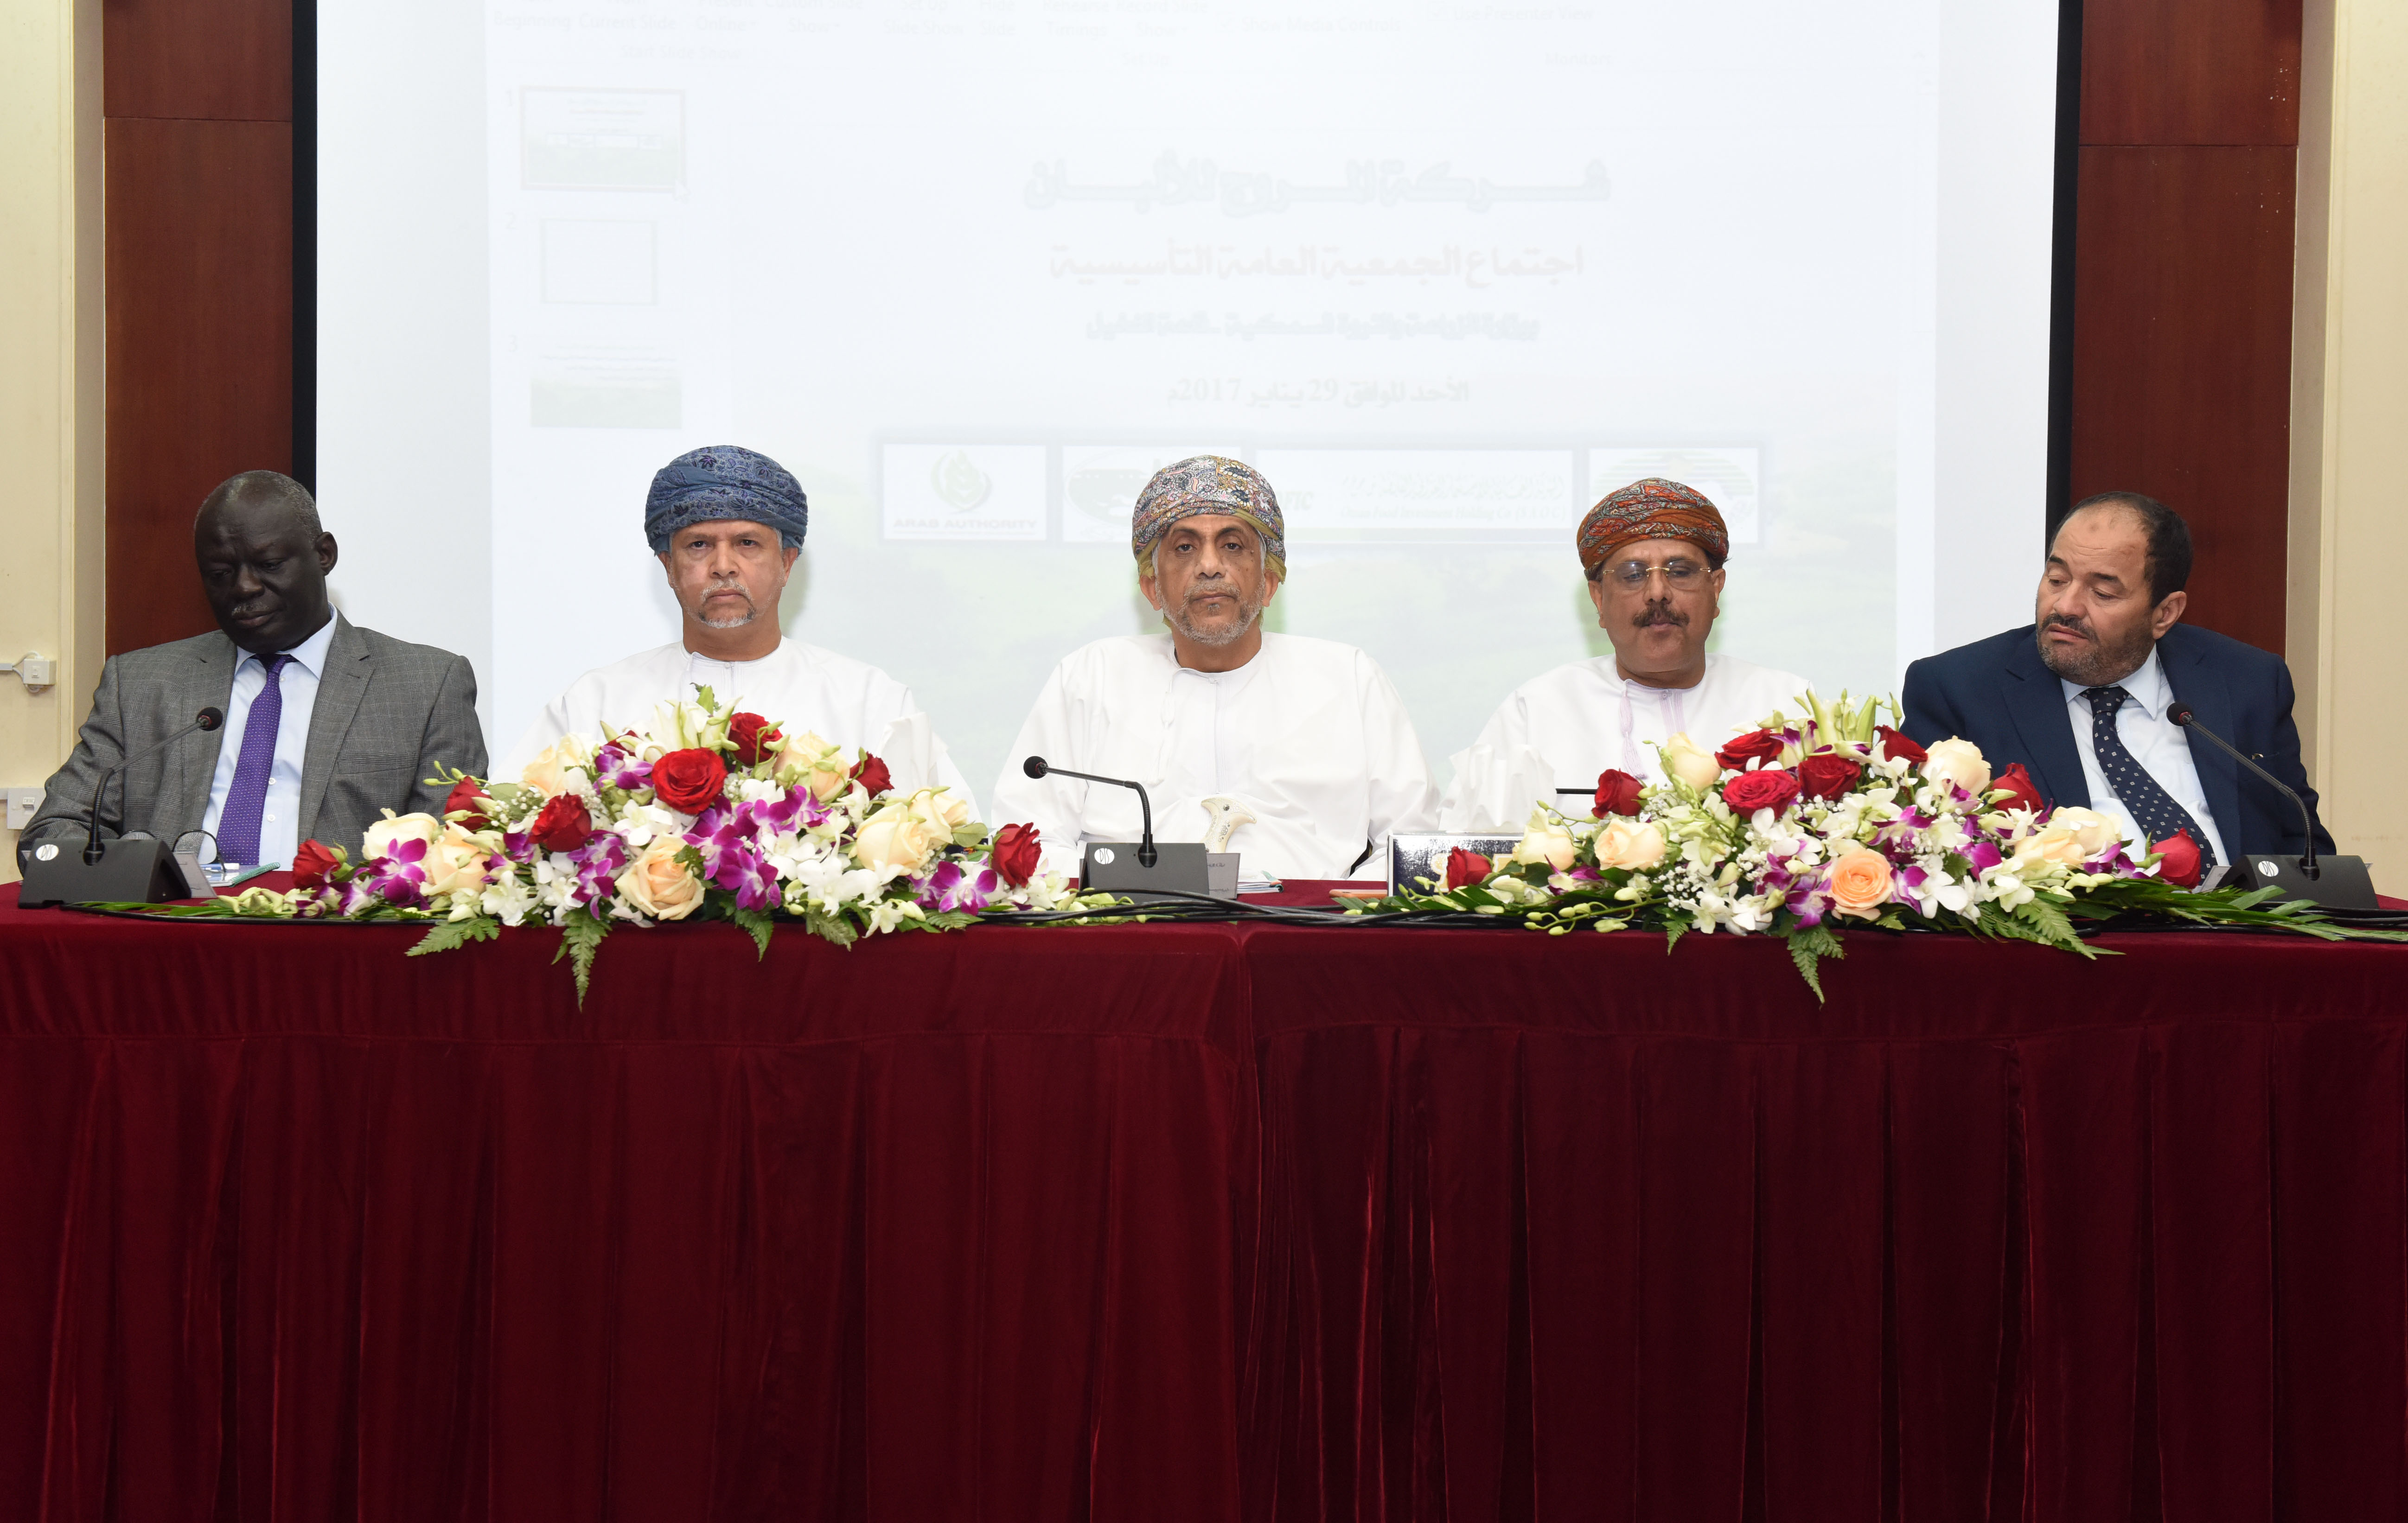 Meeting on Oman's new dairy project in Dhofar held